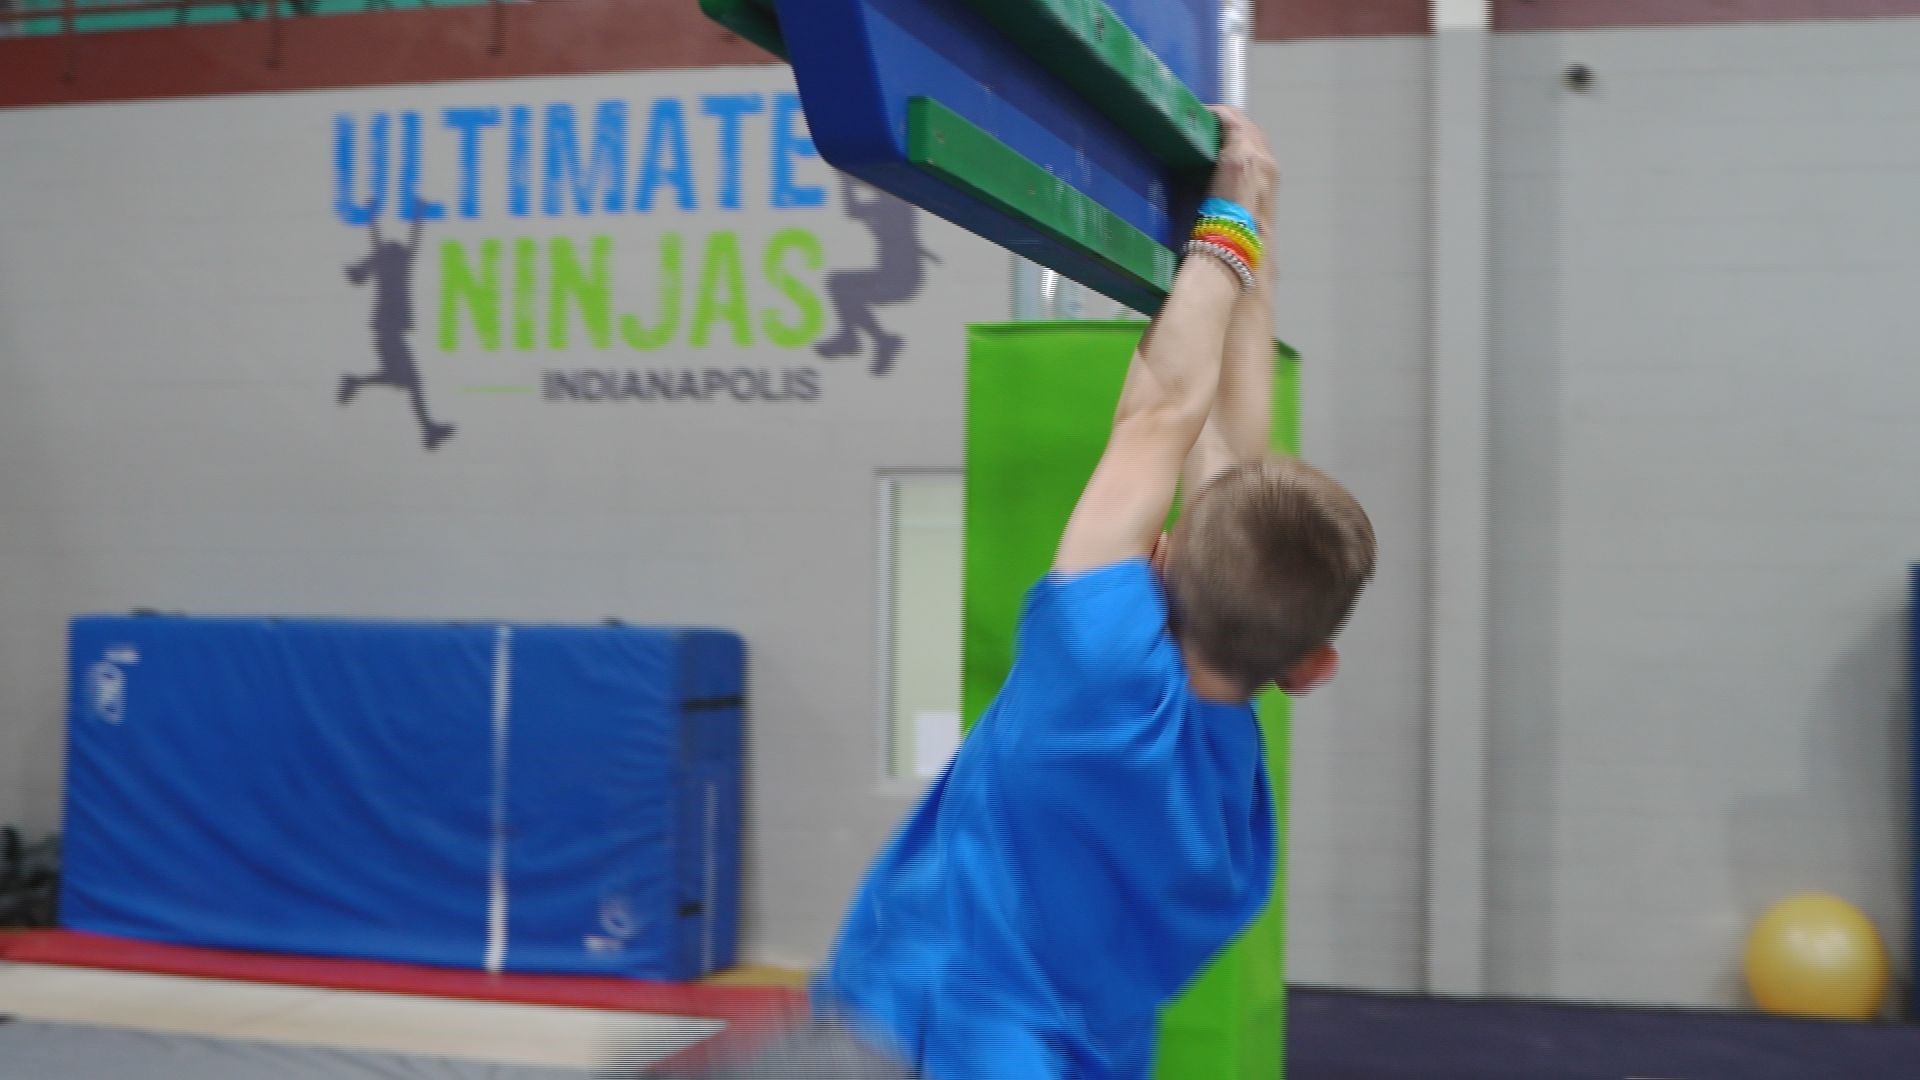 The gym is made for people who are training to appear on American Ninja Warrior but will also host camps, classes and birthday parties for kids.